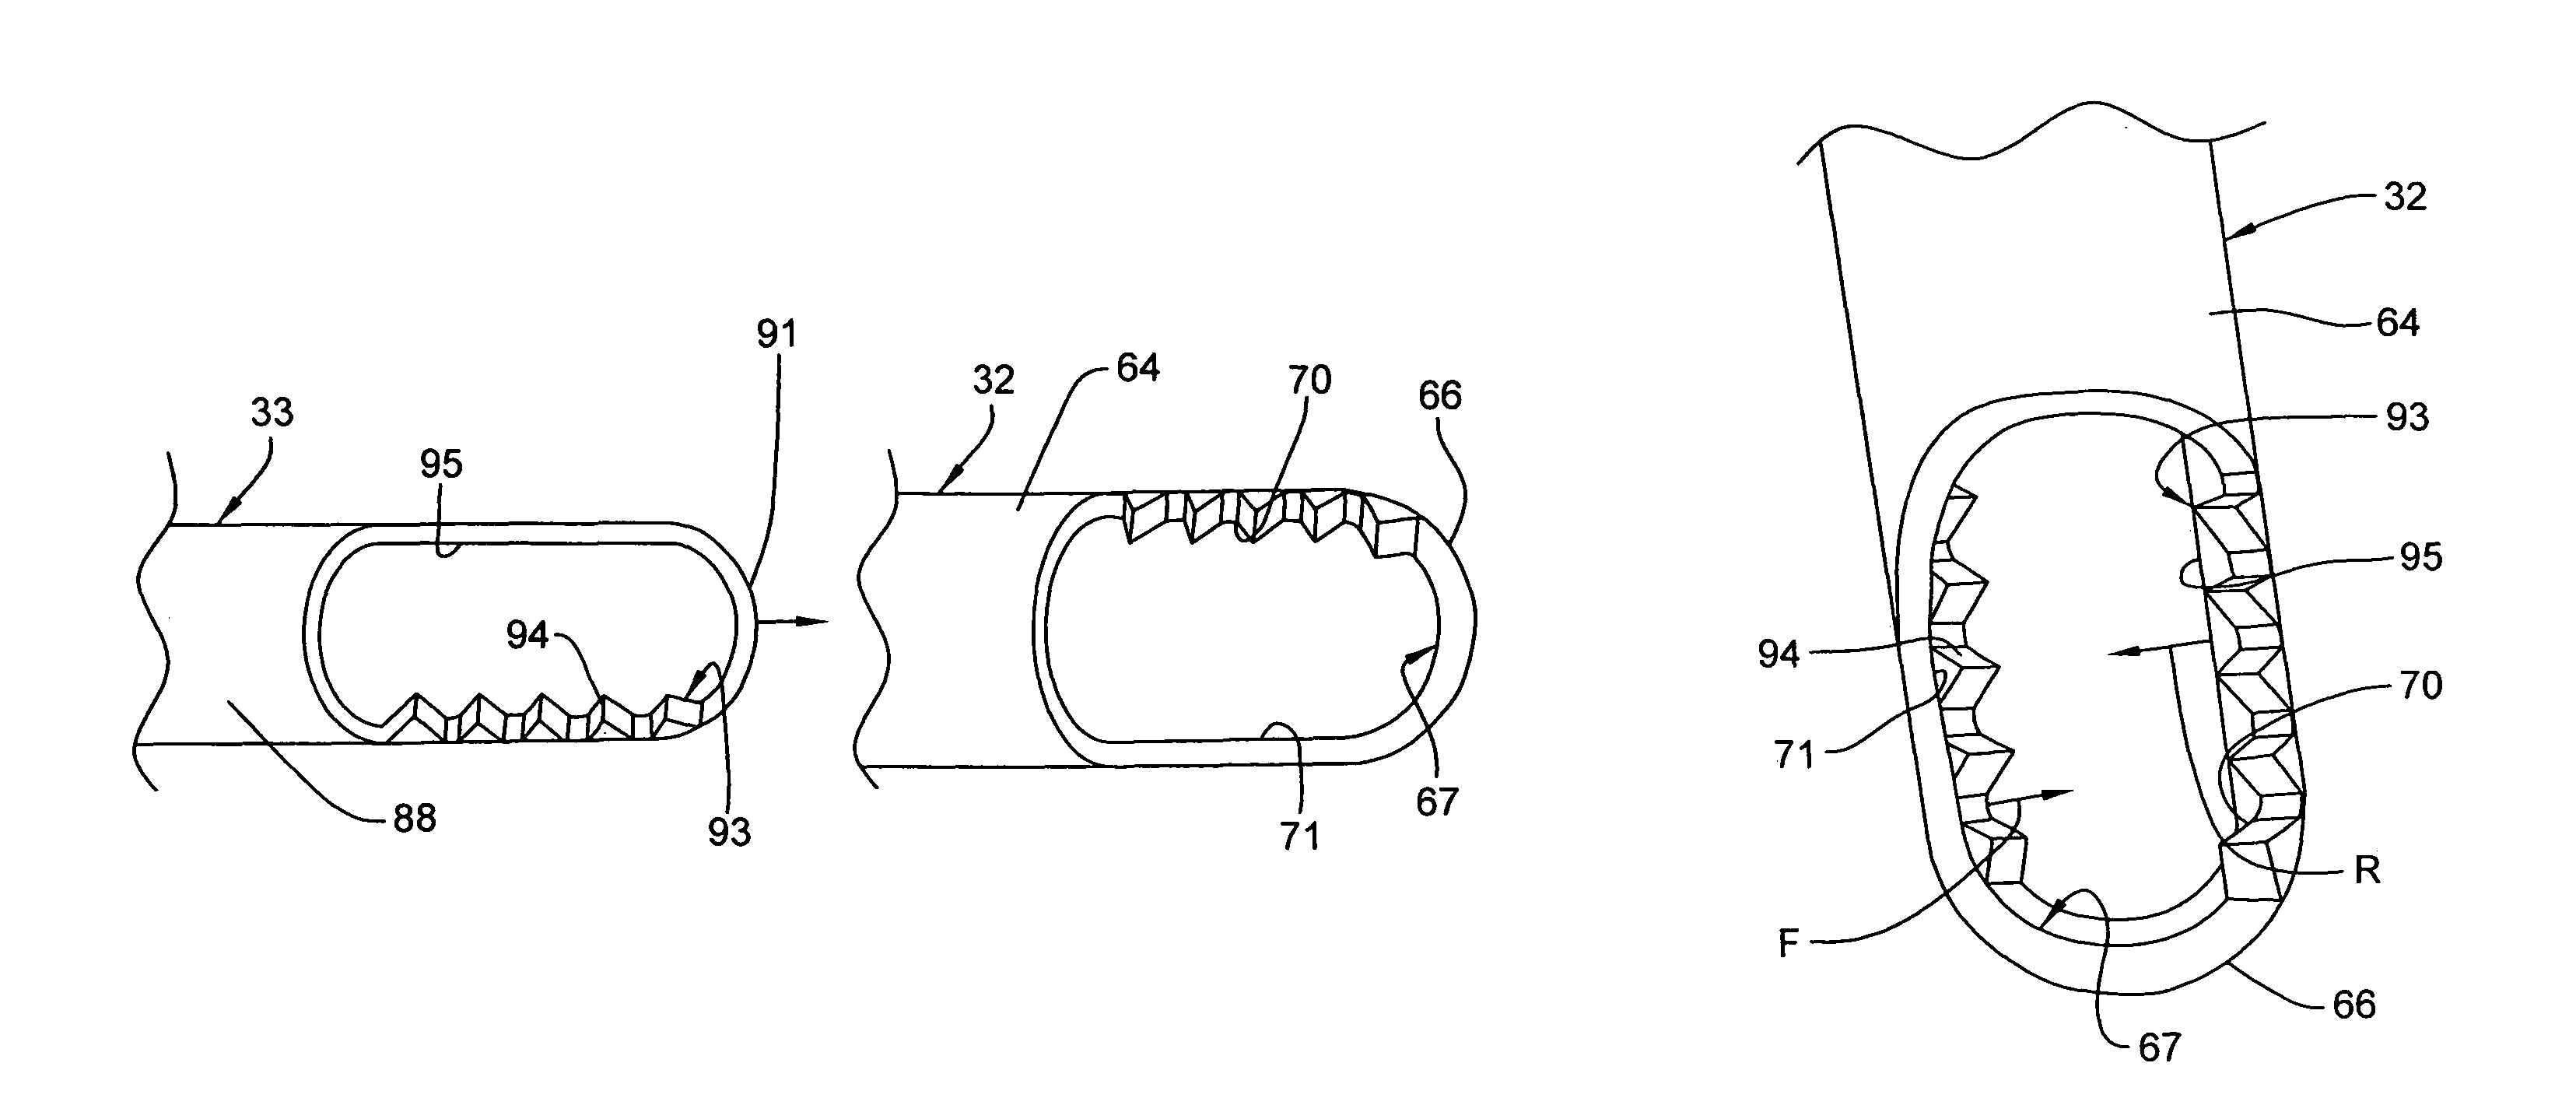 Surgical tool arrangement and surgical cutting accessory for use therewith with the tool arrangement including a toothed cutting edge and a generally straight cutting edge